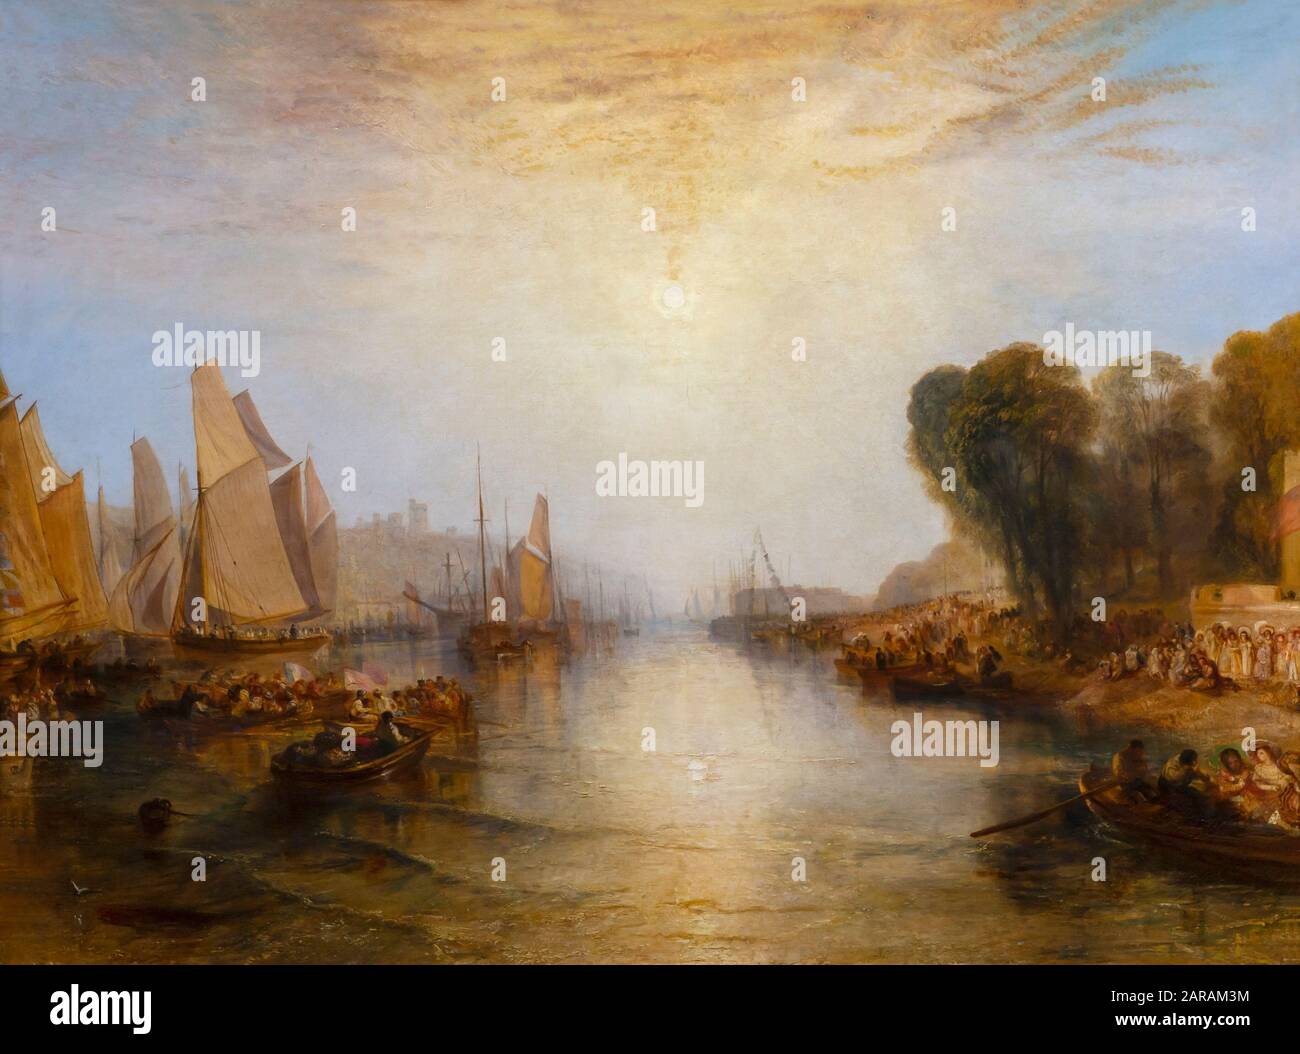 East Cowes Castle, The Regatta Starting from their Moorings, JMW Turner, 1827-1828, Stock Photo